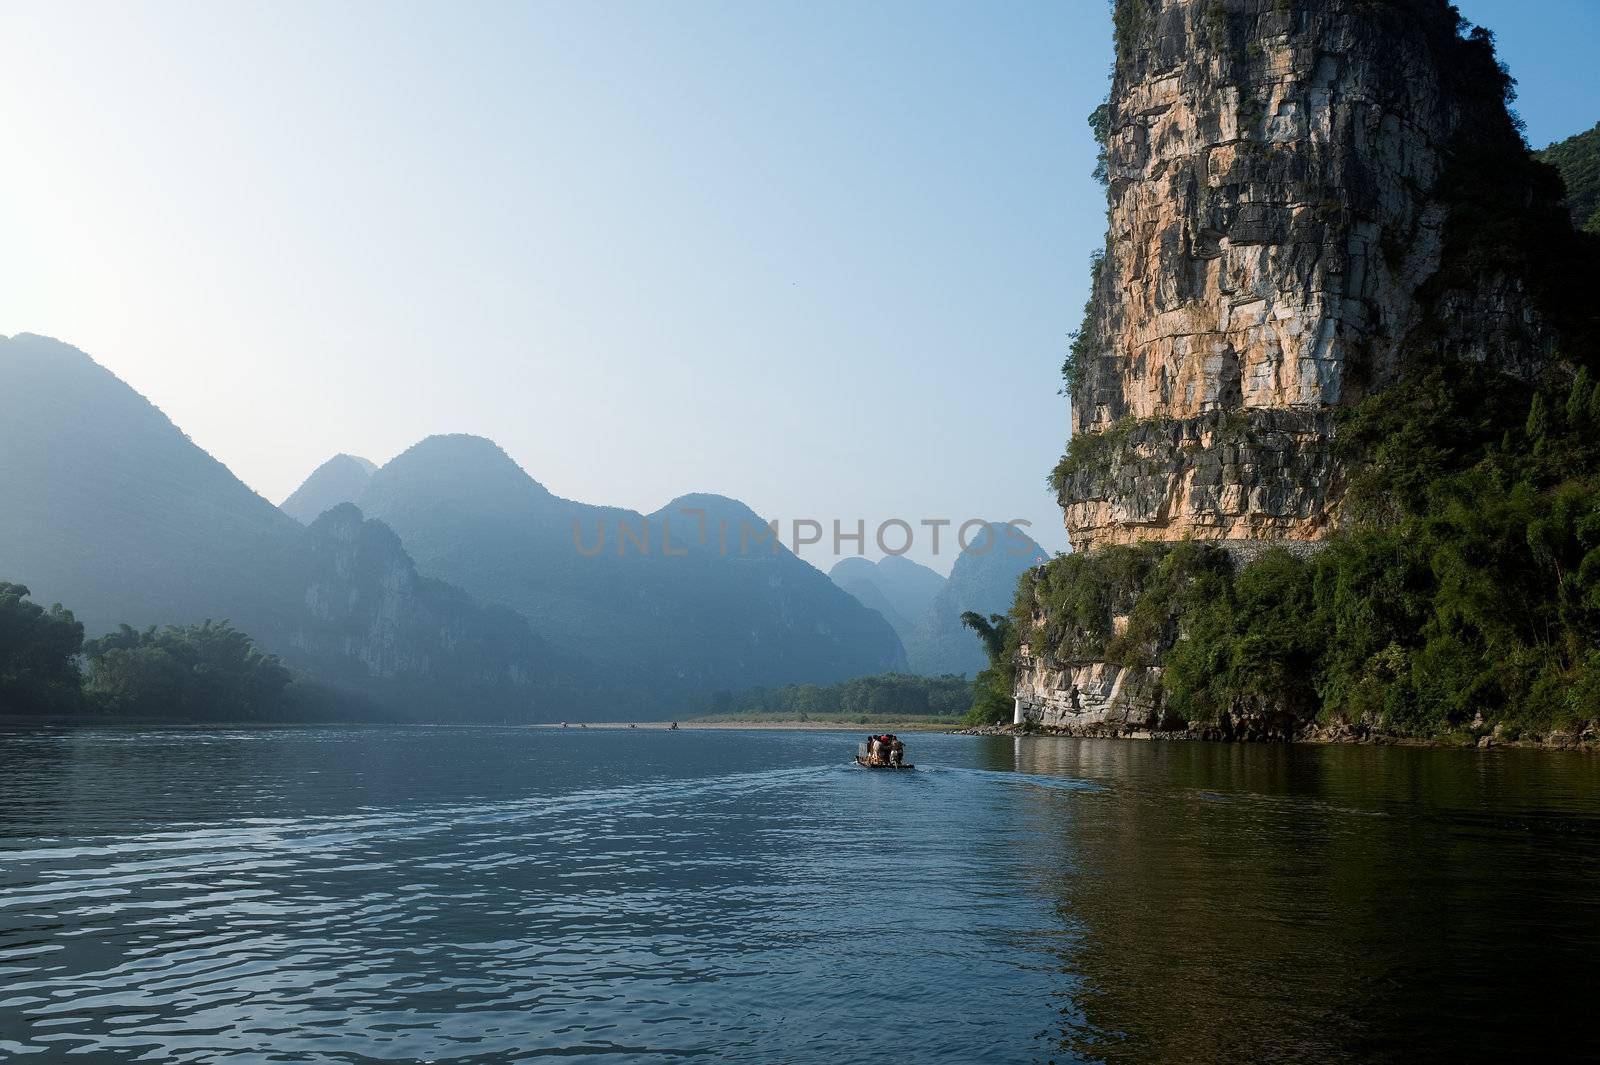 Guilin mountains in China by Marcus